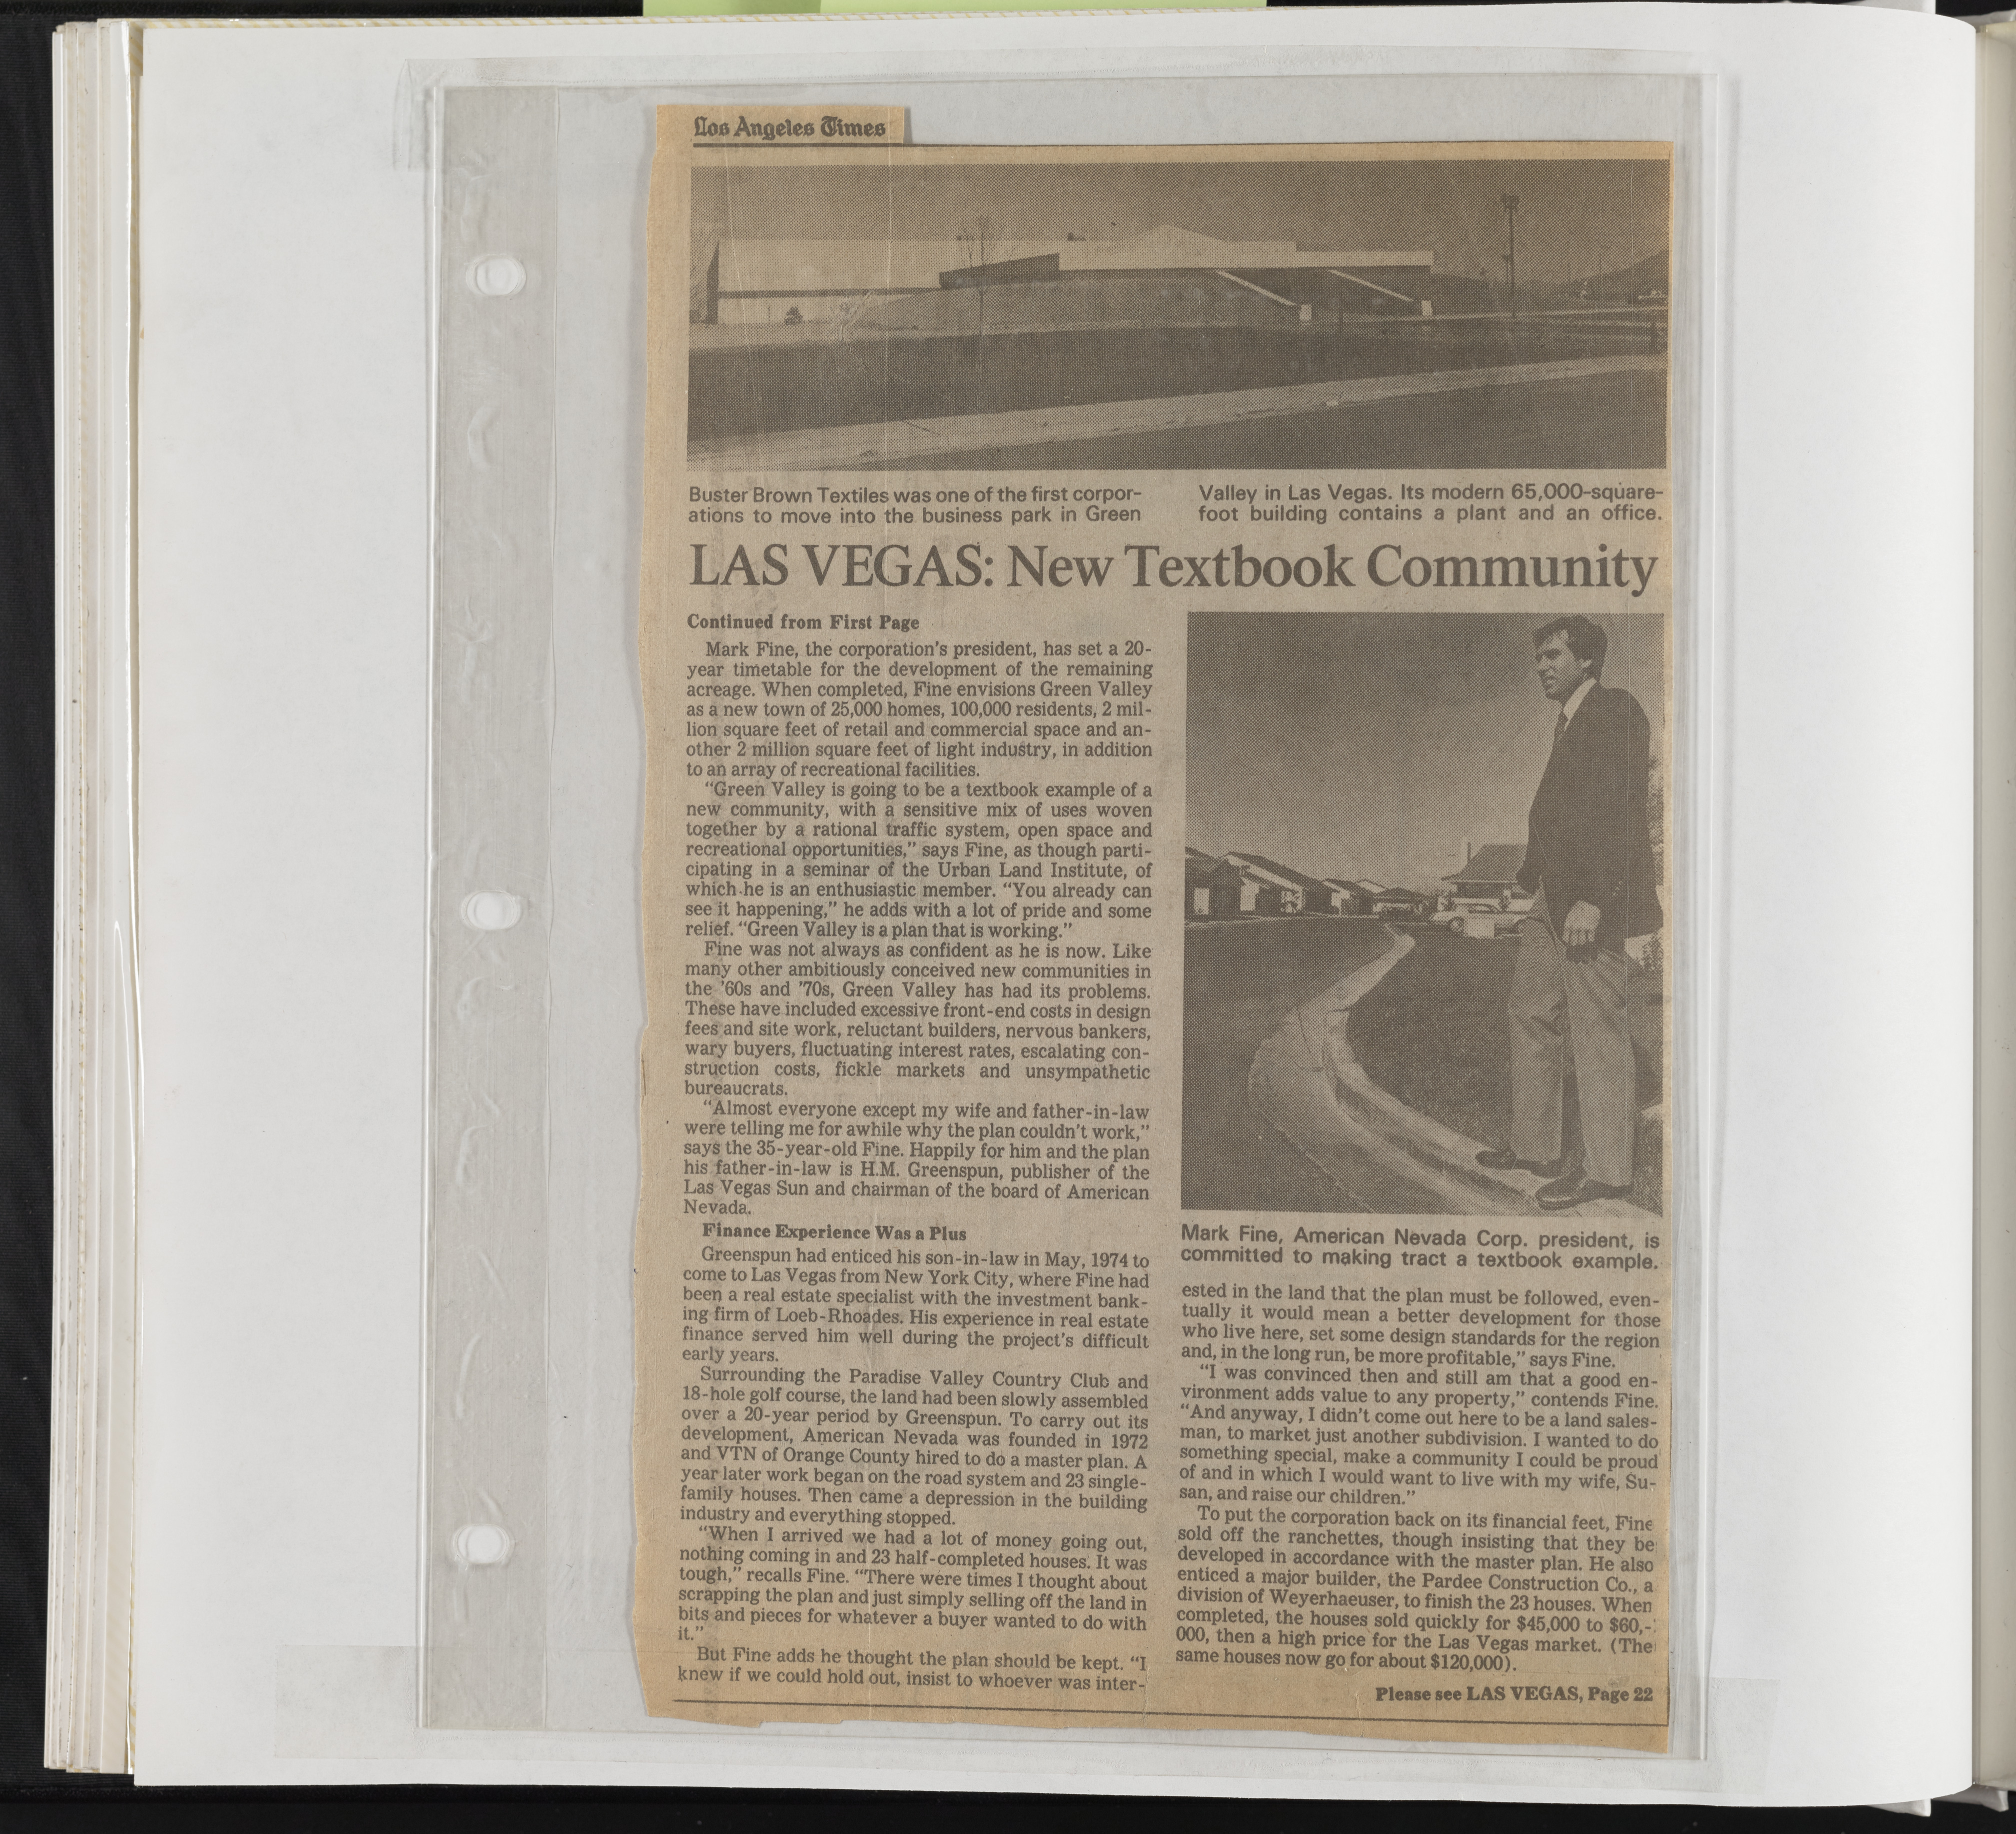 Newspaper clipping, Las Vegas: New Textbook Community, Los Angeles Times